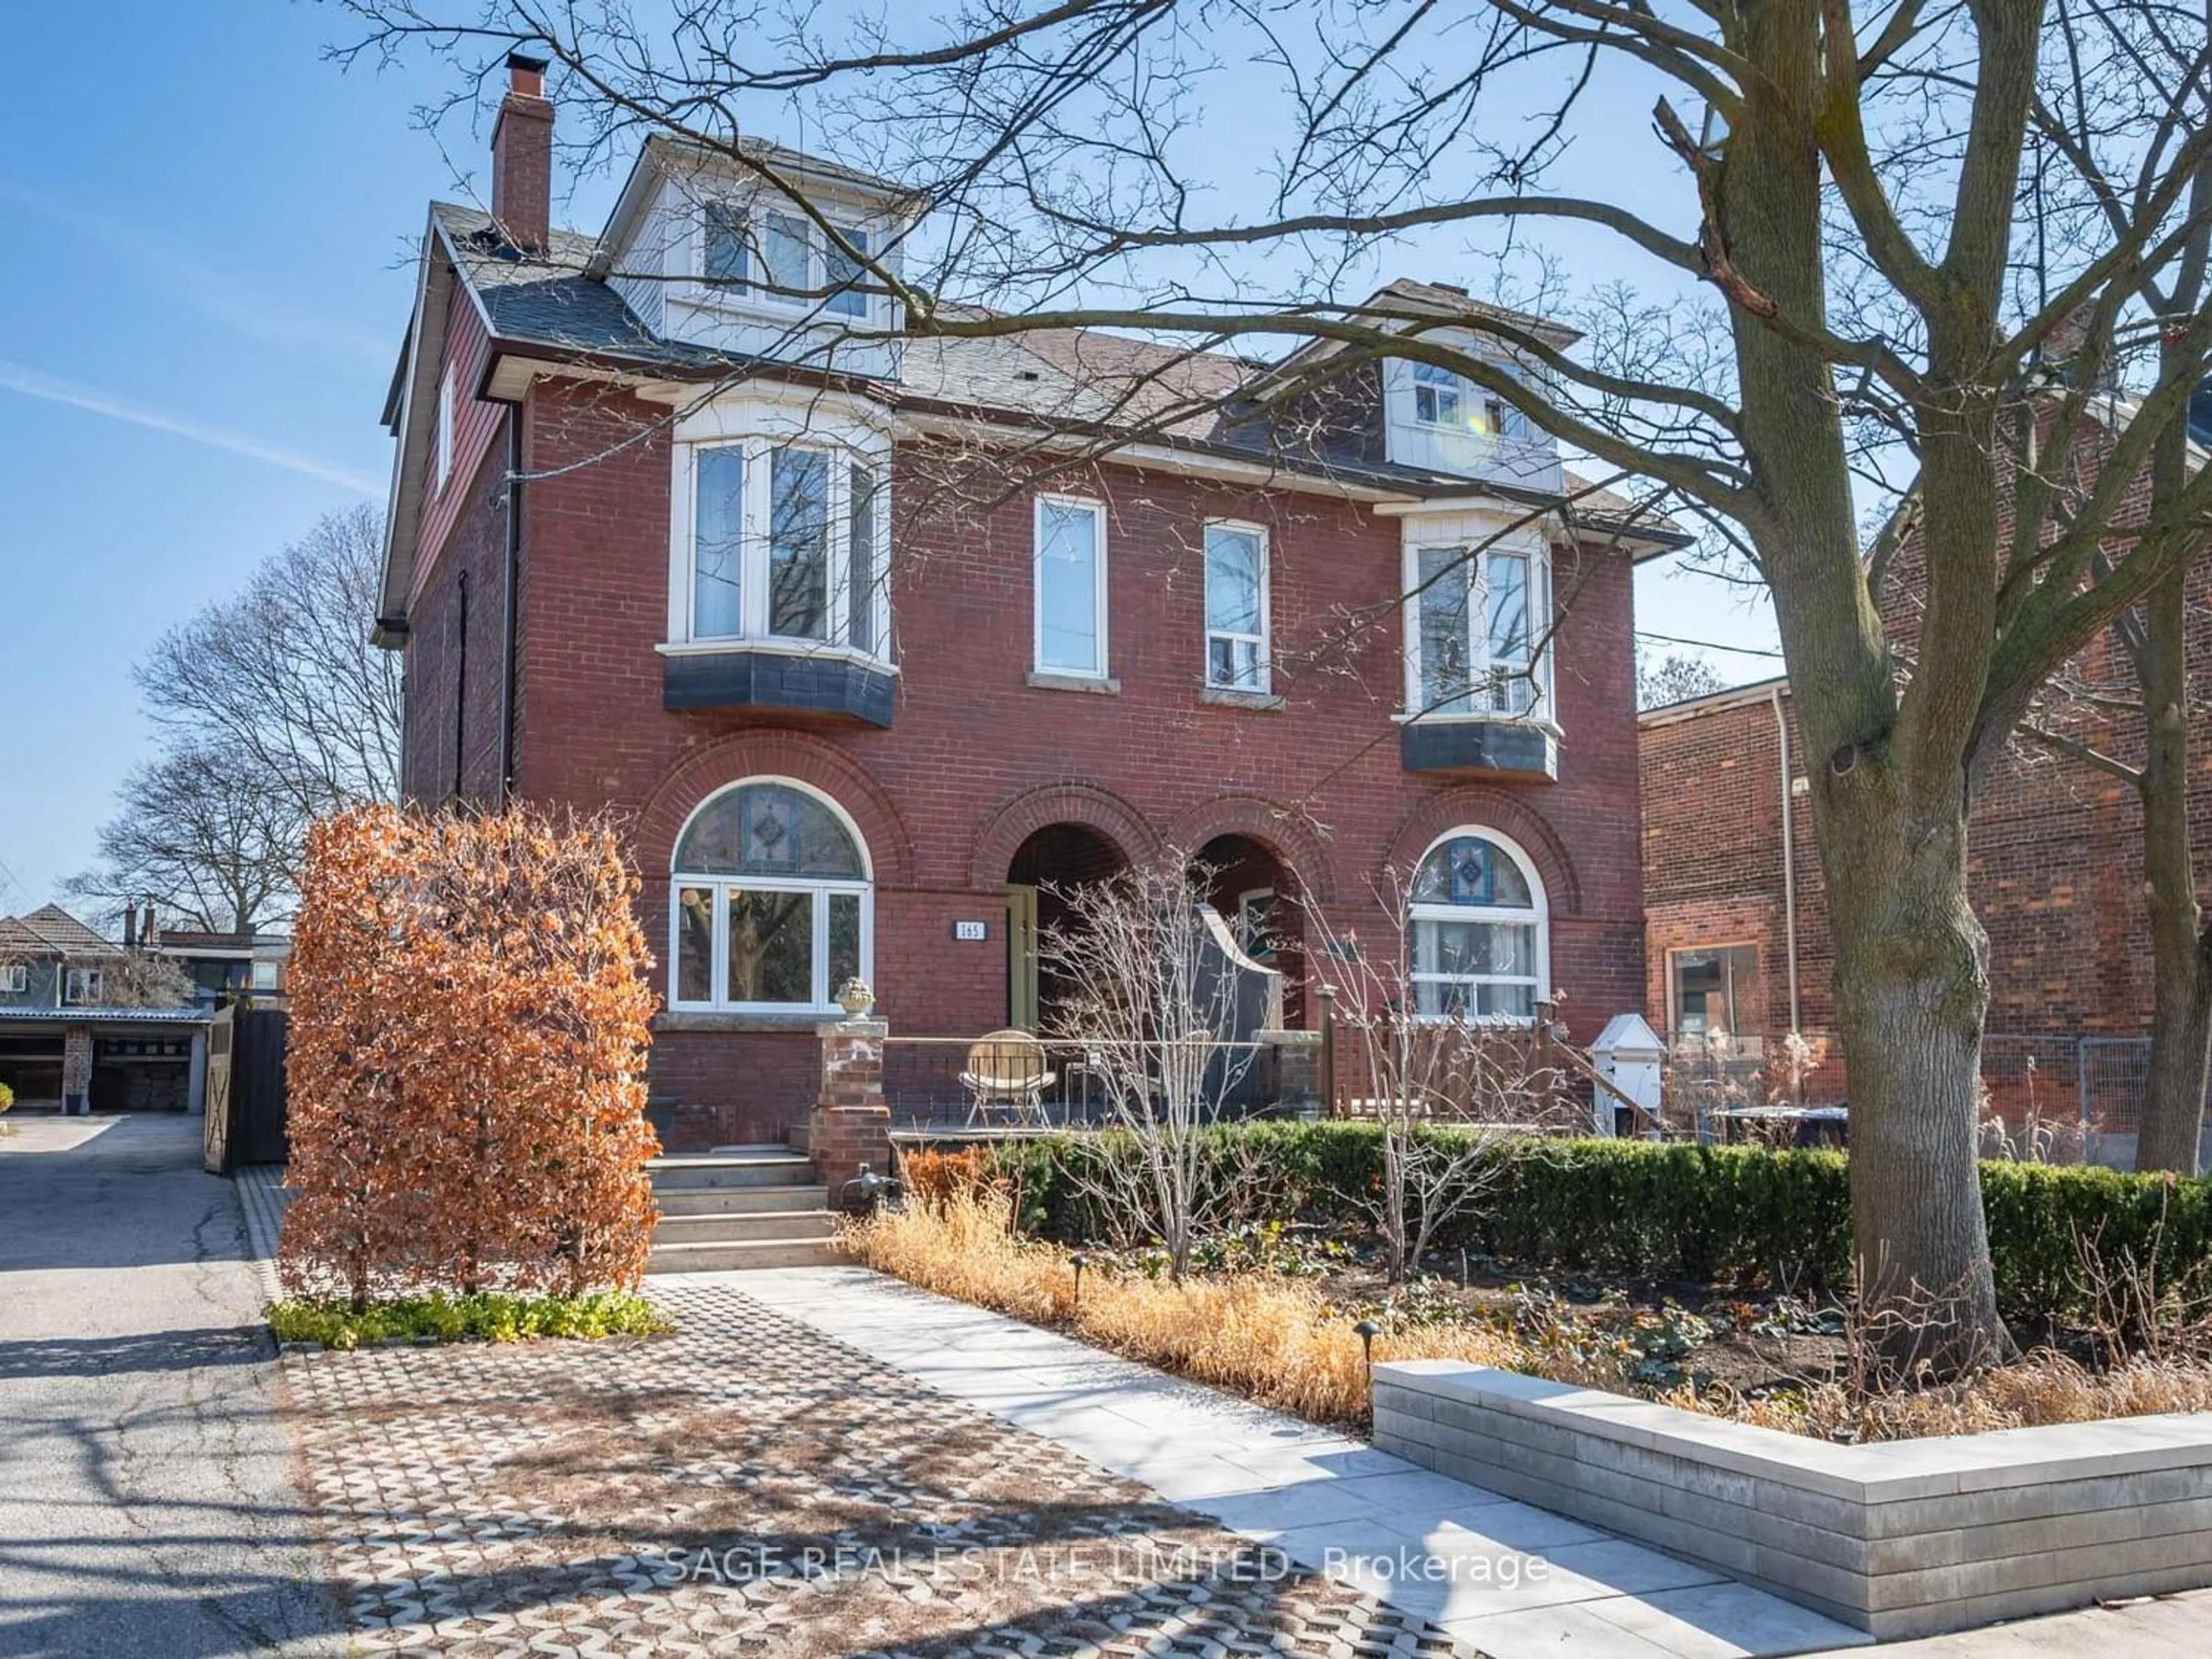 Home with brick exterior material for 165 Delaware Ave, Toronto Ontario M6H 2T2